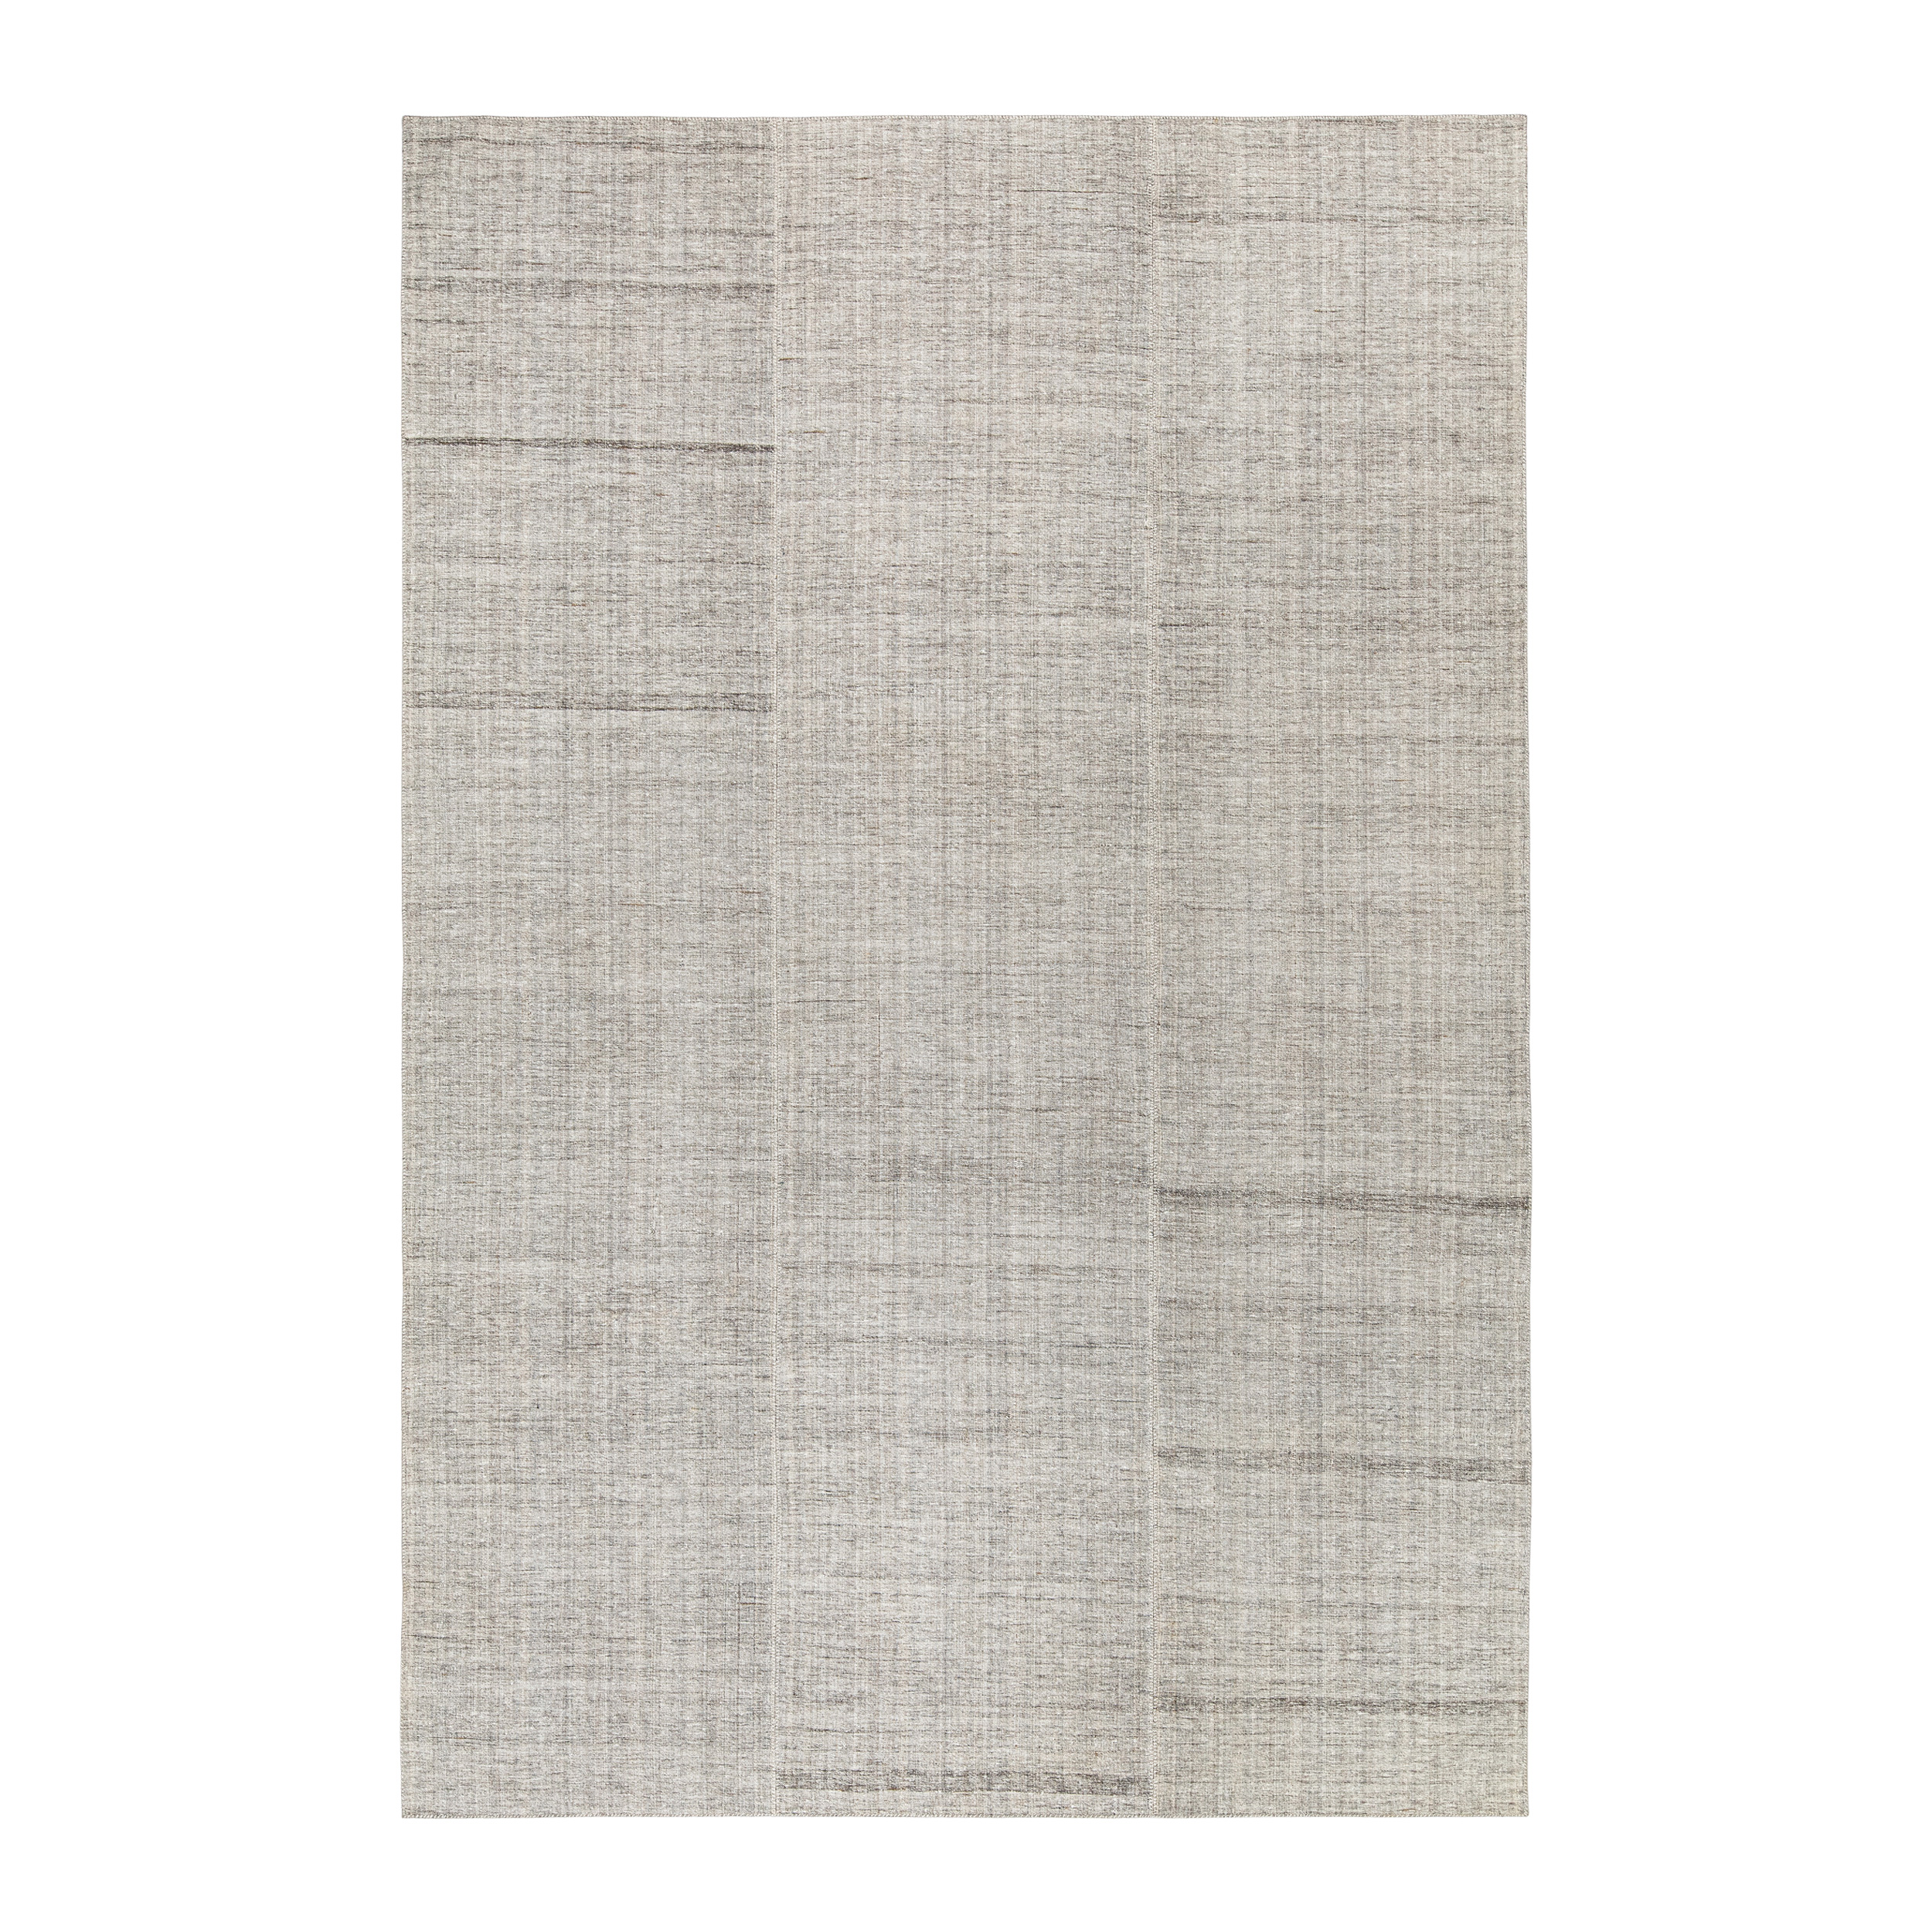 Pelas flatweave rug that is made with handspun wool and natural dyes.